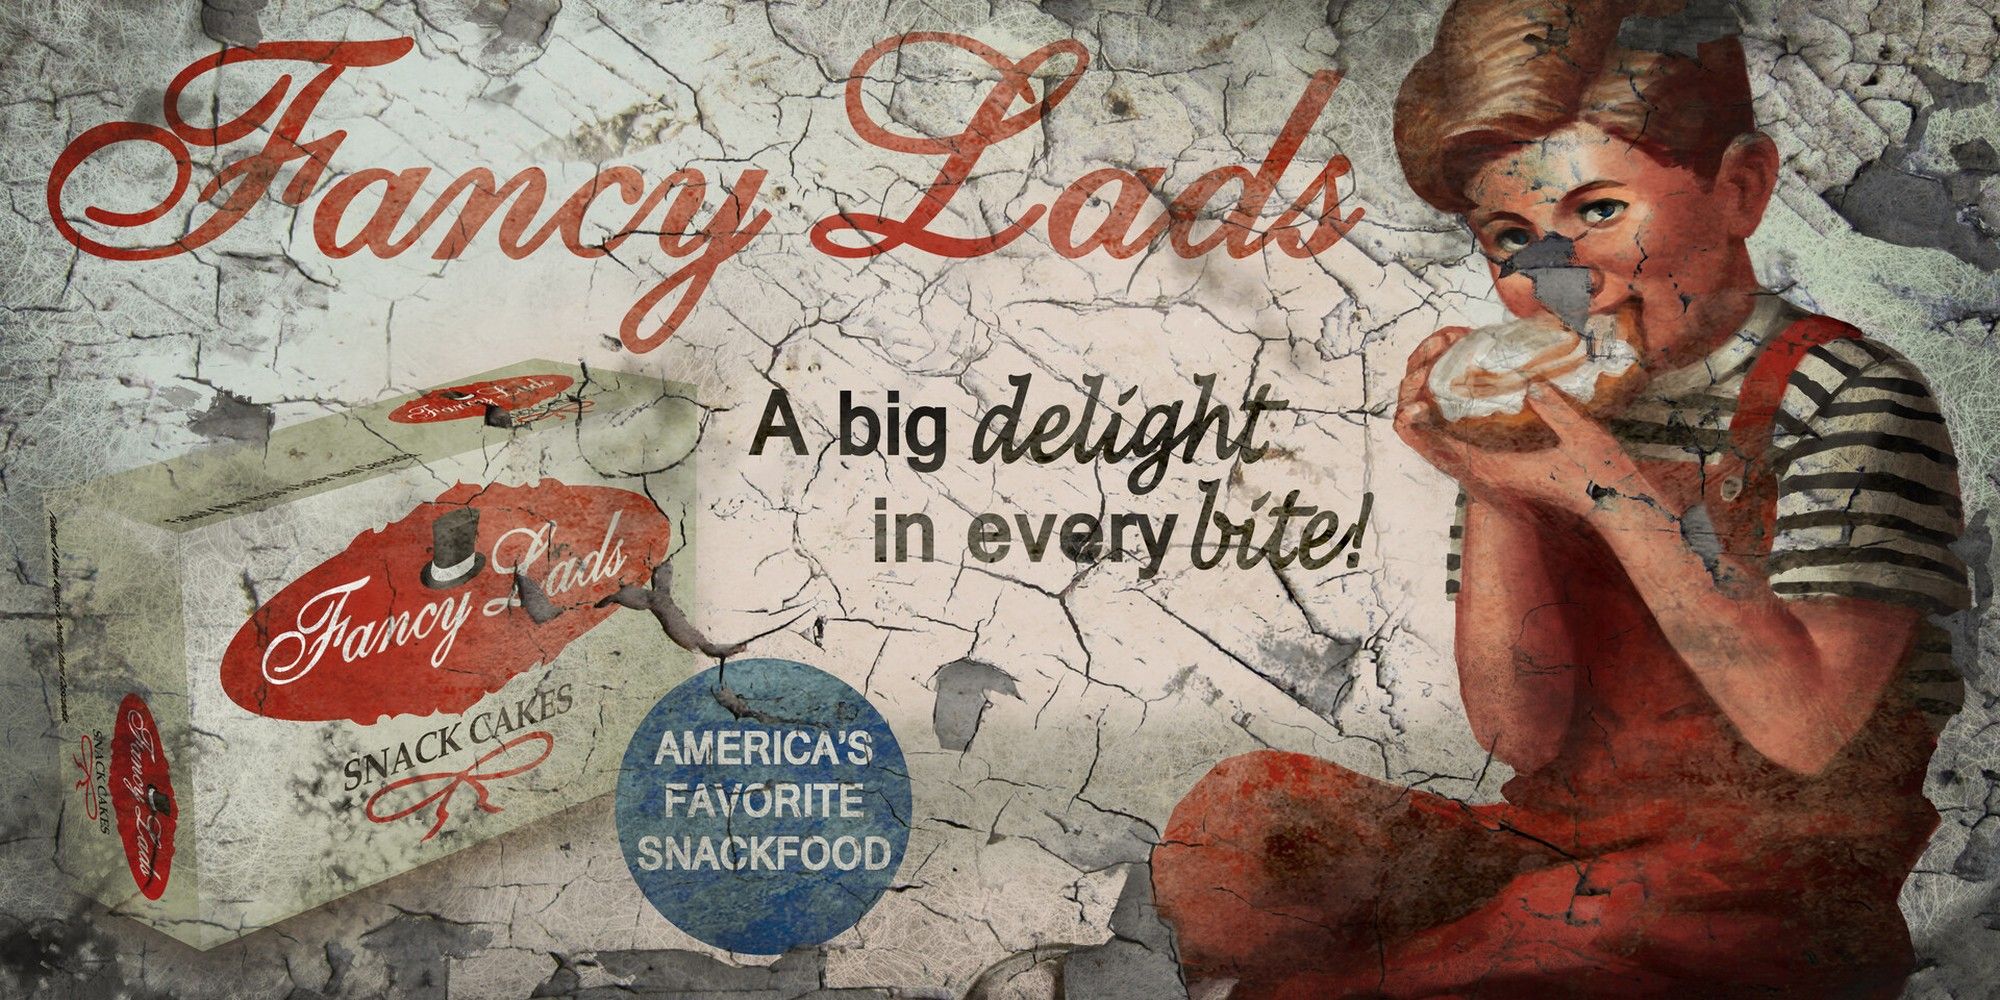 fallout fancy lads snack cake faded advertisement